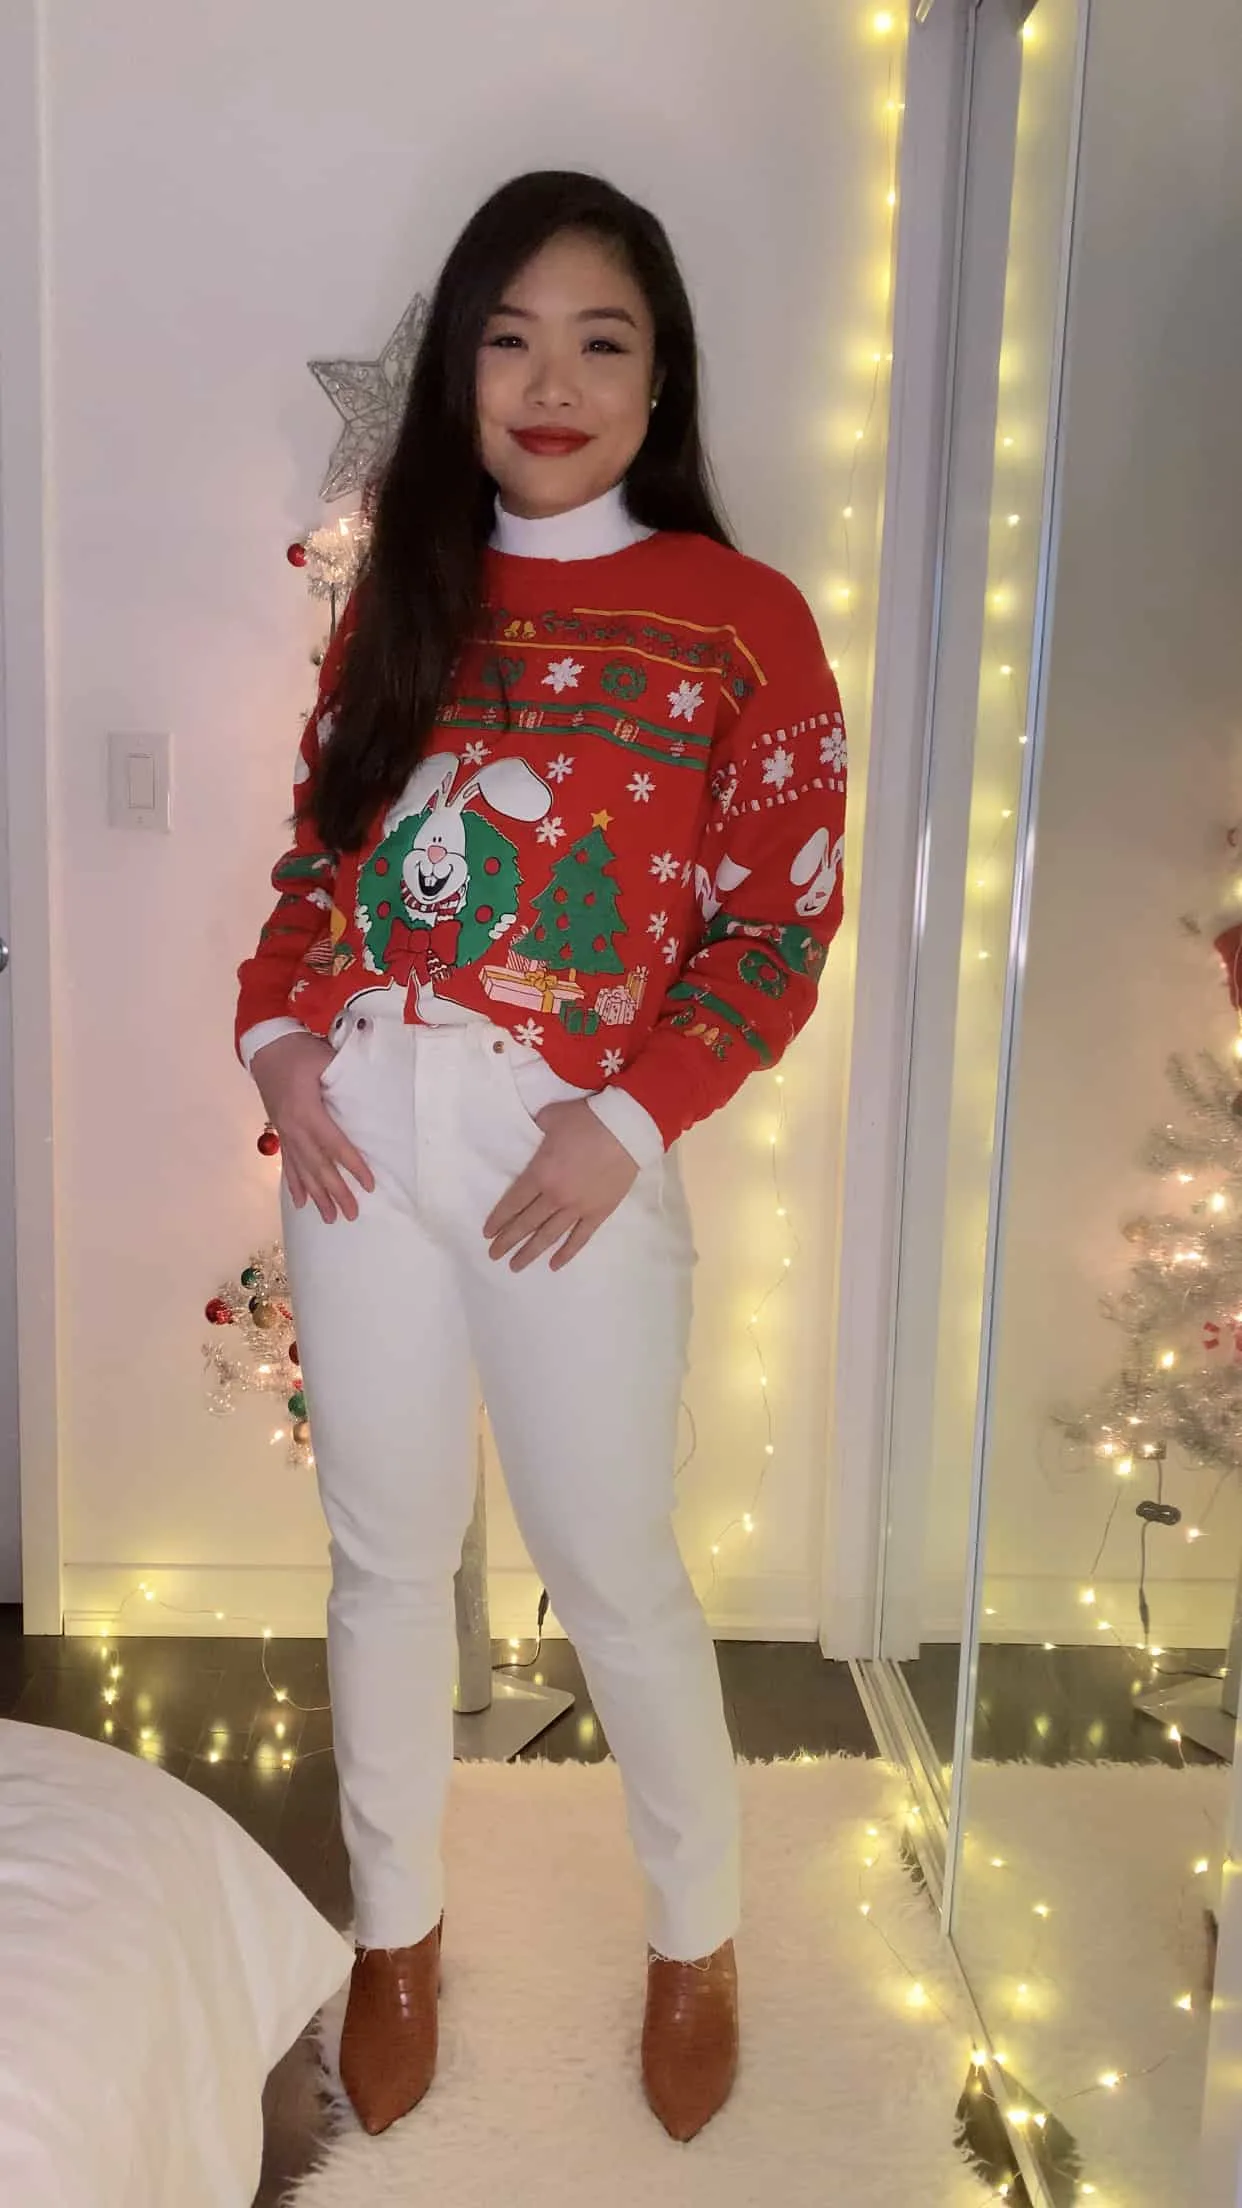 Ugly Christmas sweater outfit ideas to wear this holiday season if you're not sure how to style them!